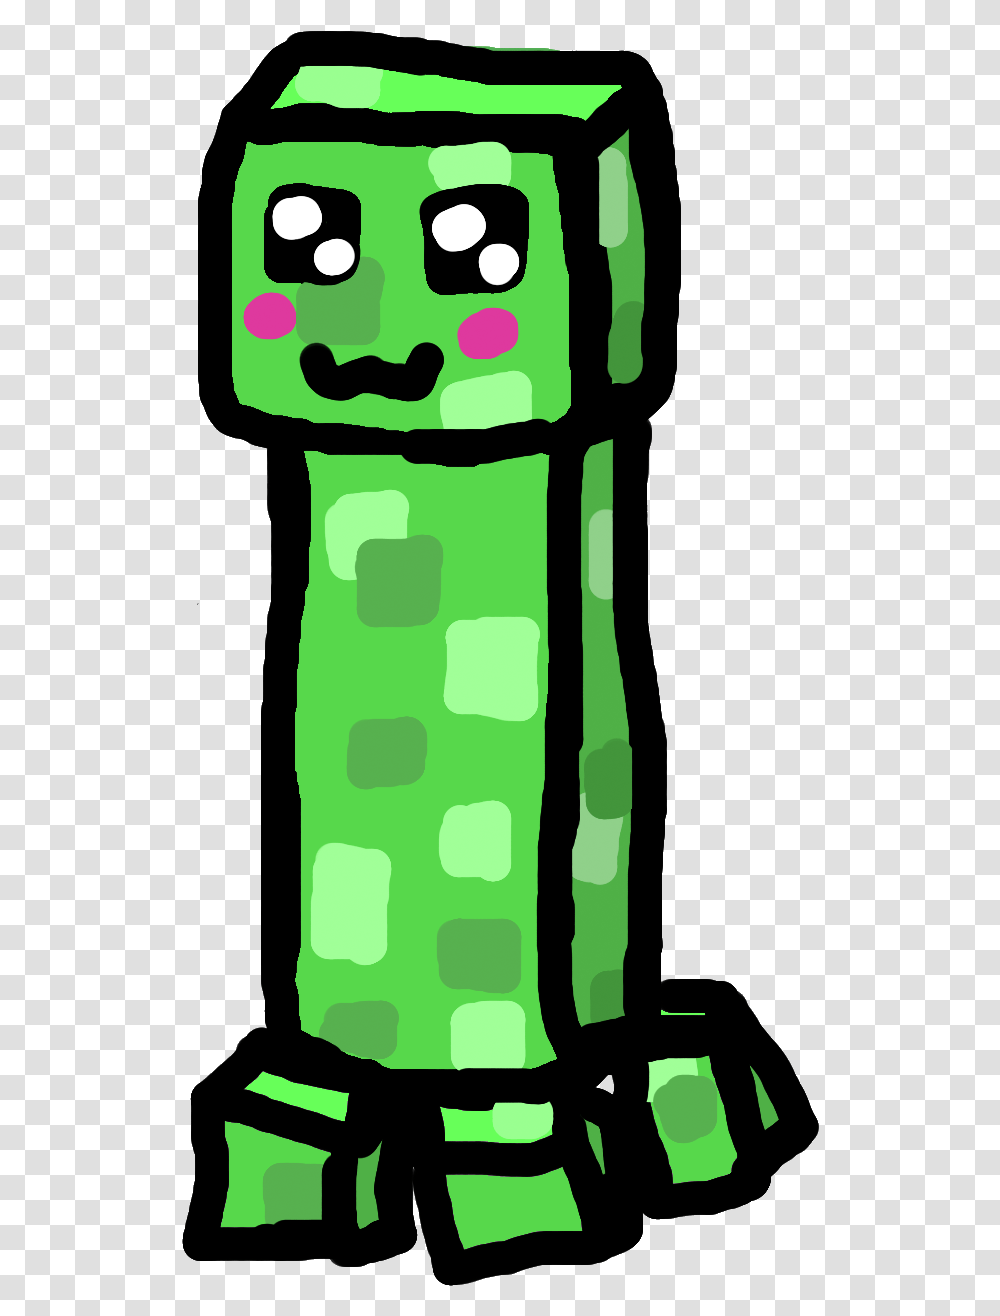 Minecraft Cute Creeper N3 Free Image Cute Creeper, Green, Bottle, Beverage, Drink Transparent Png